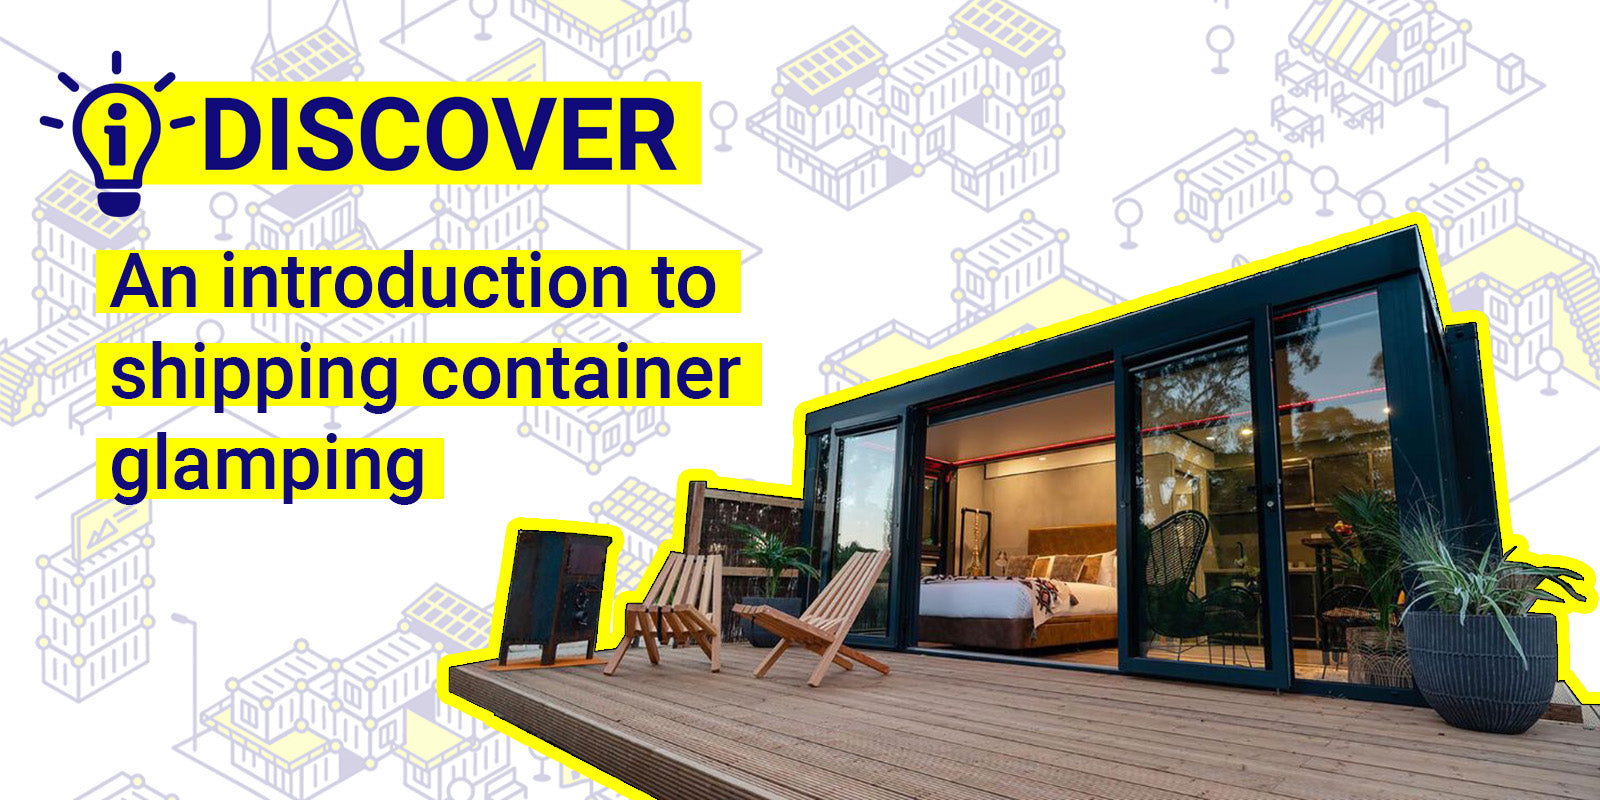 An introduction to shipping container glamping